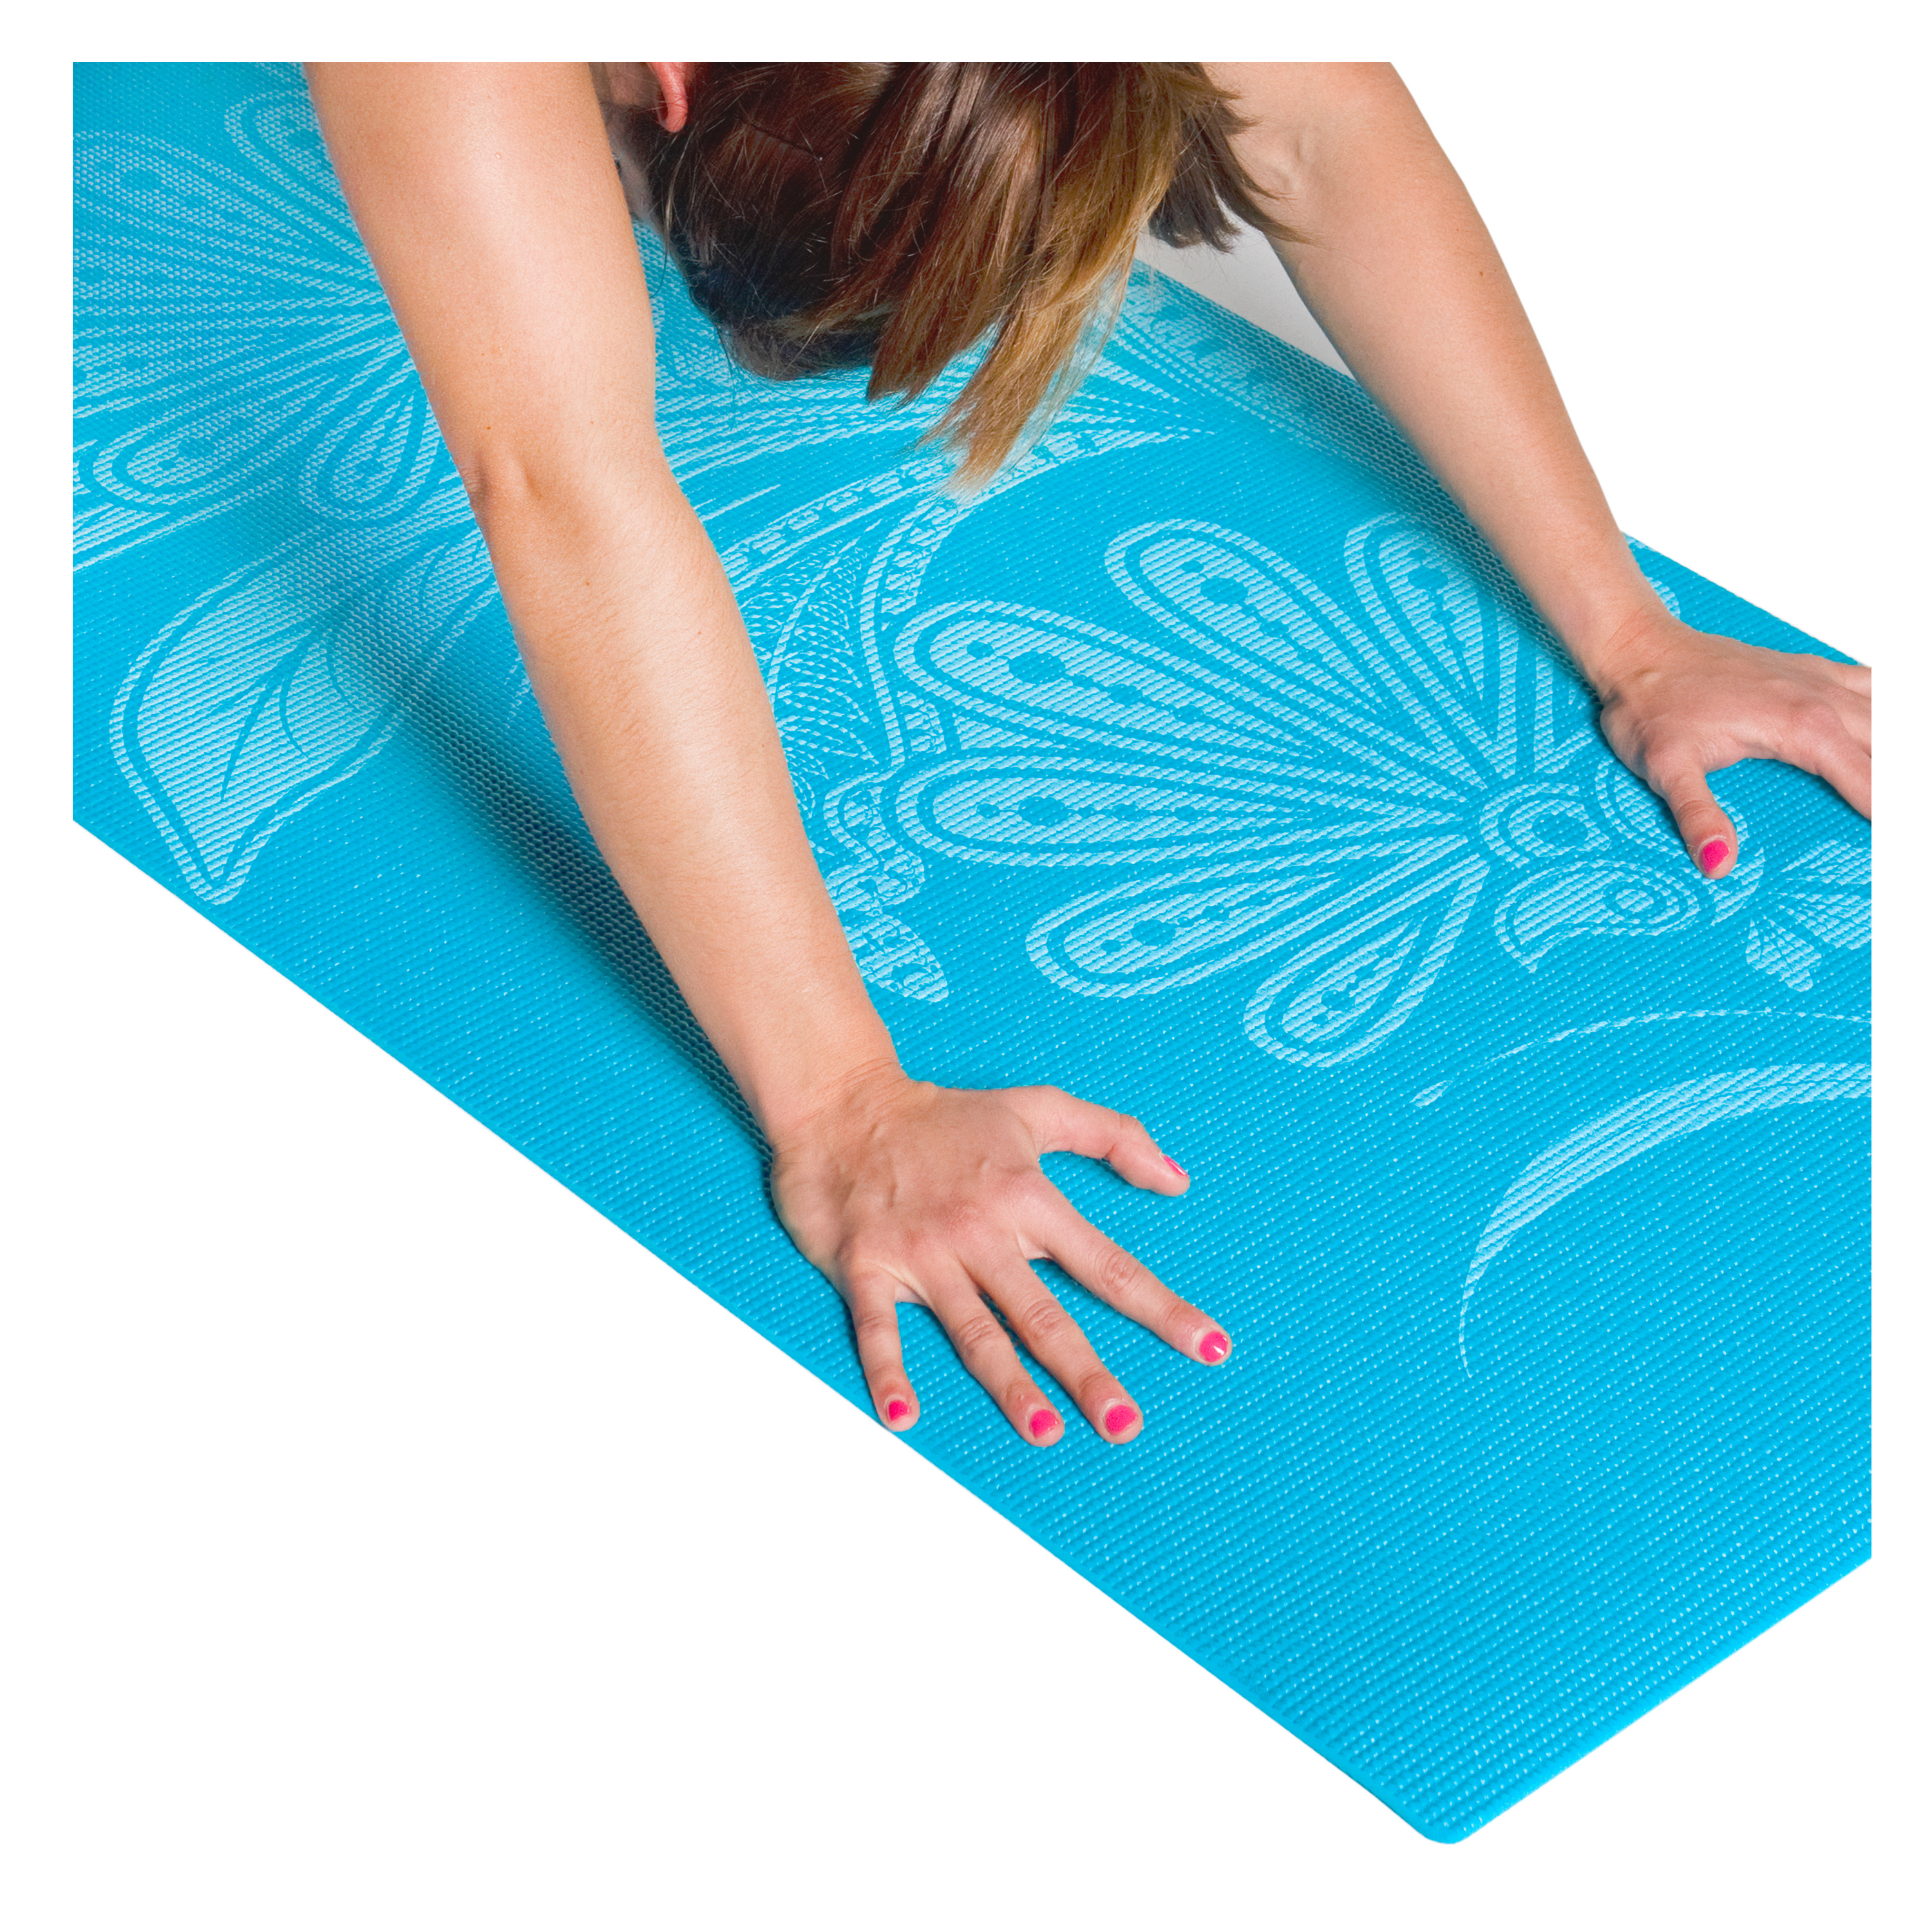 Tone Fitness 5mm 24 x 68in Yoga Mat, Multiple Colors - image 5 of 5